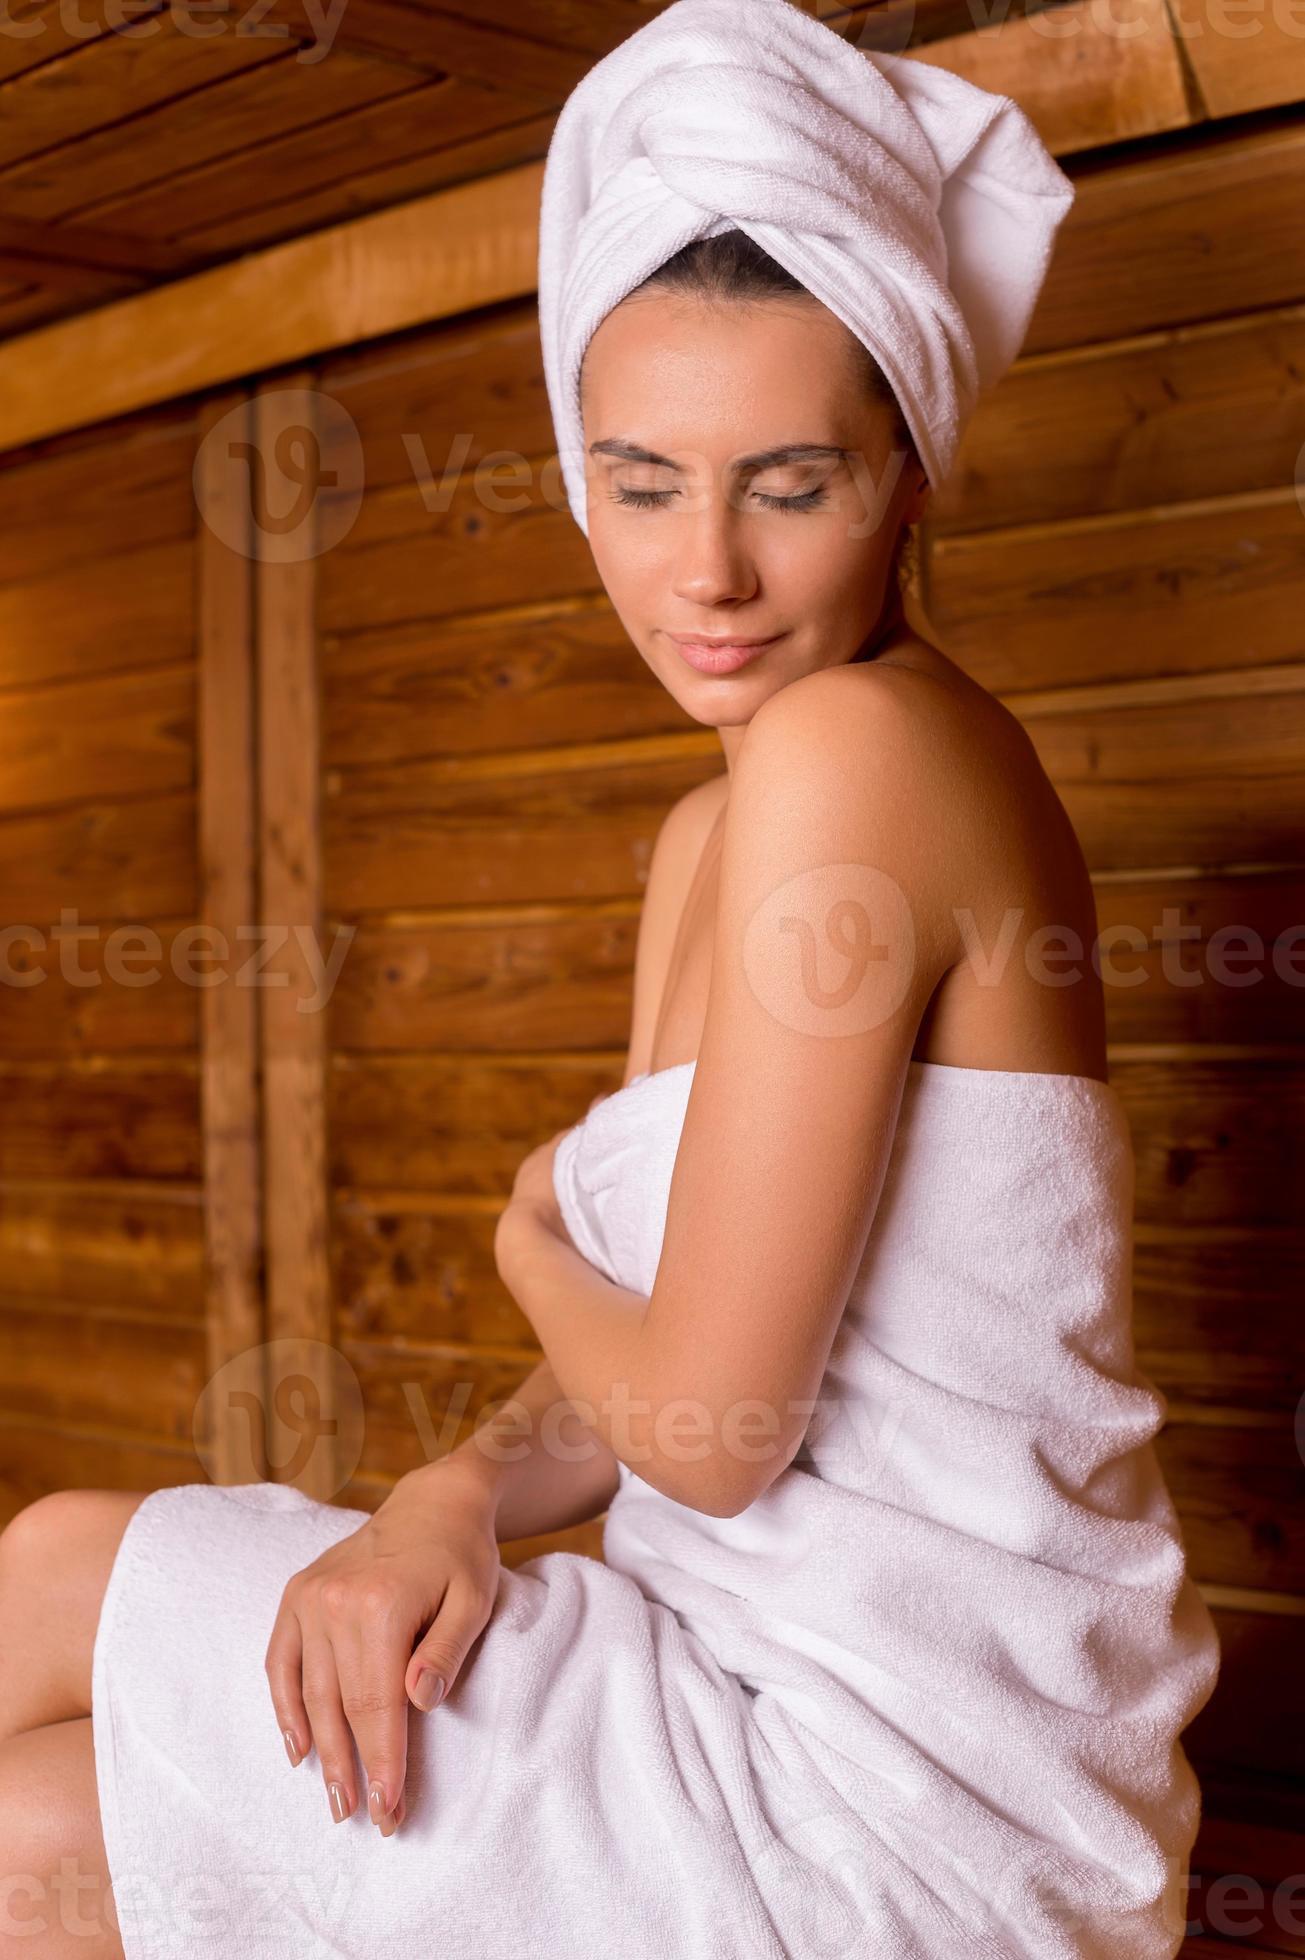 https://static.vecteezy.com/system/resources/previews/013/581/940/large_2x/beauty-in-sauna-beautiful-young-woman-wrapped-in-towel-relaxing-in-sauna-and-keeping-eyes-closed-photo.JPG